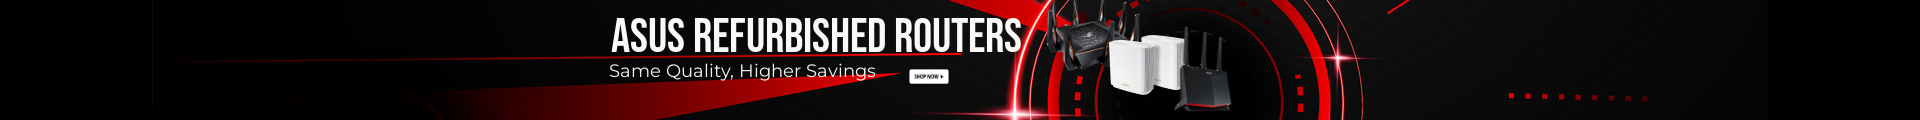 Refurbished routers